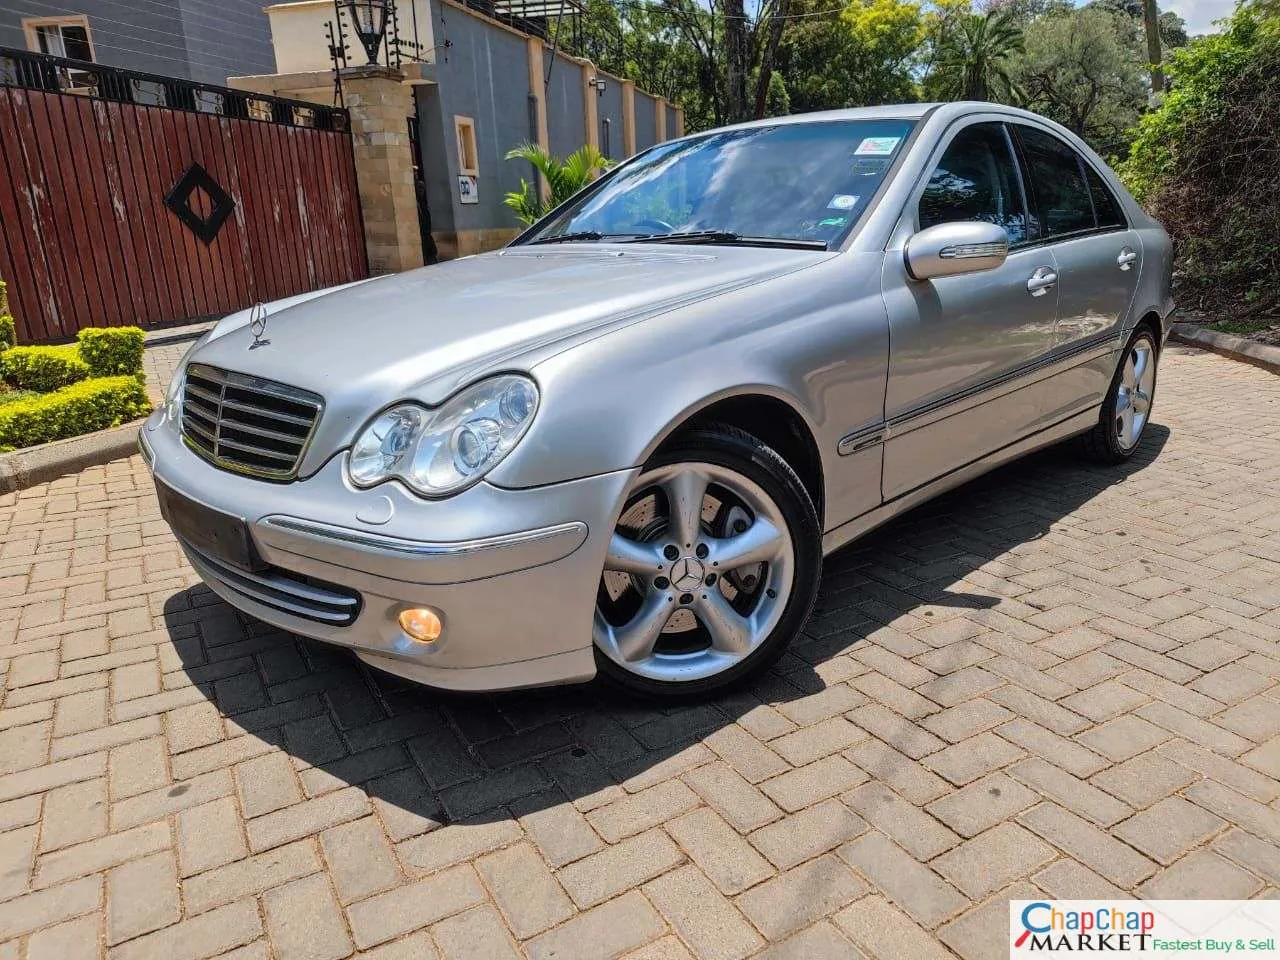 Cars Cars For Sale/Vehicles-Mercedes Benz C200 QUICK SALE You Pay 30% DEPOSIT Trade in OK EXCLUSIVE 4